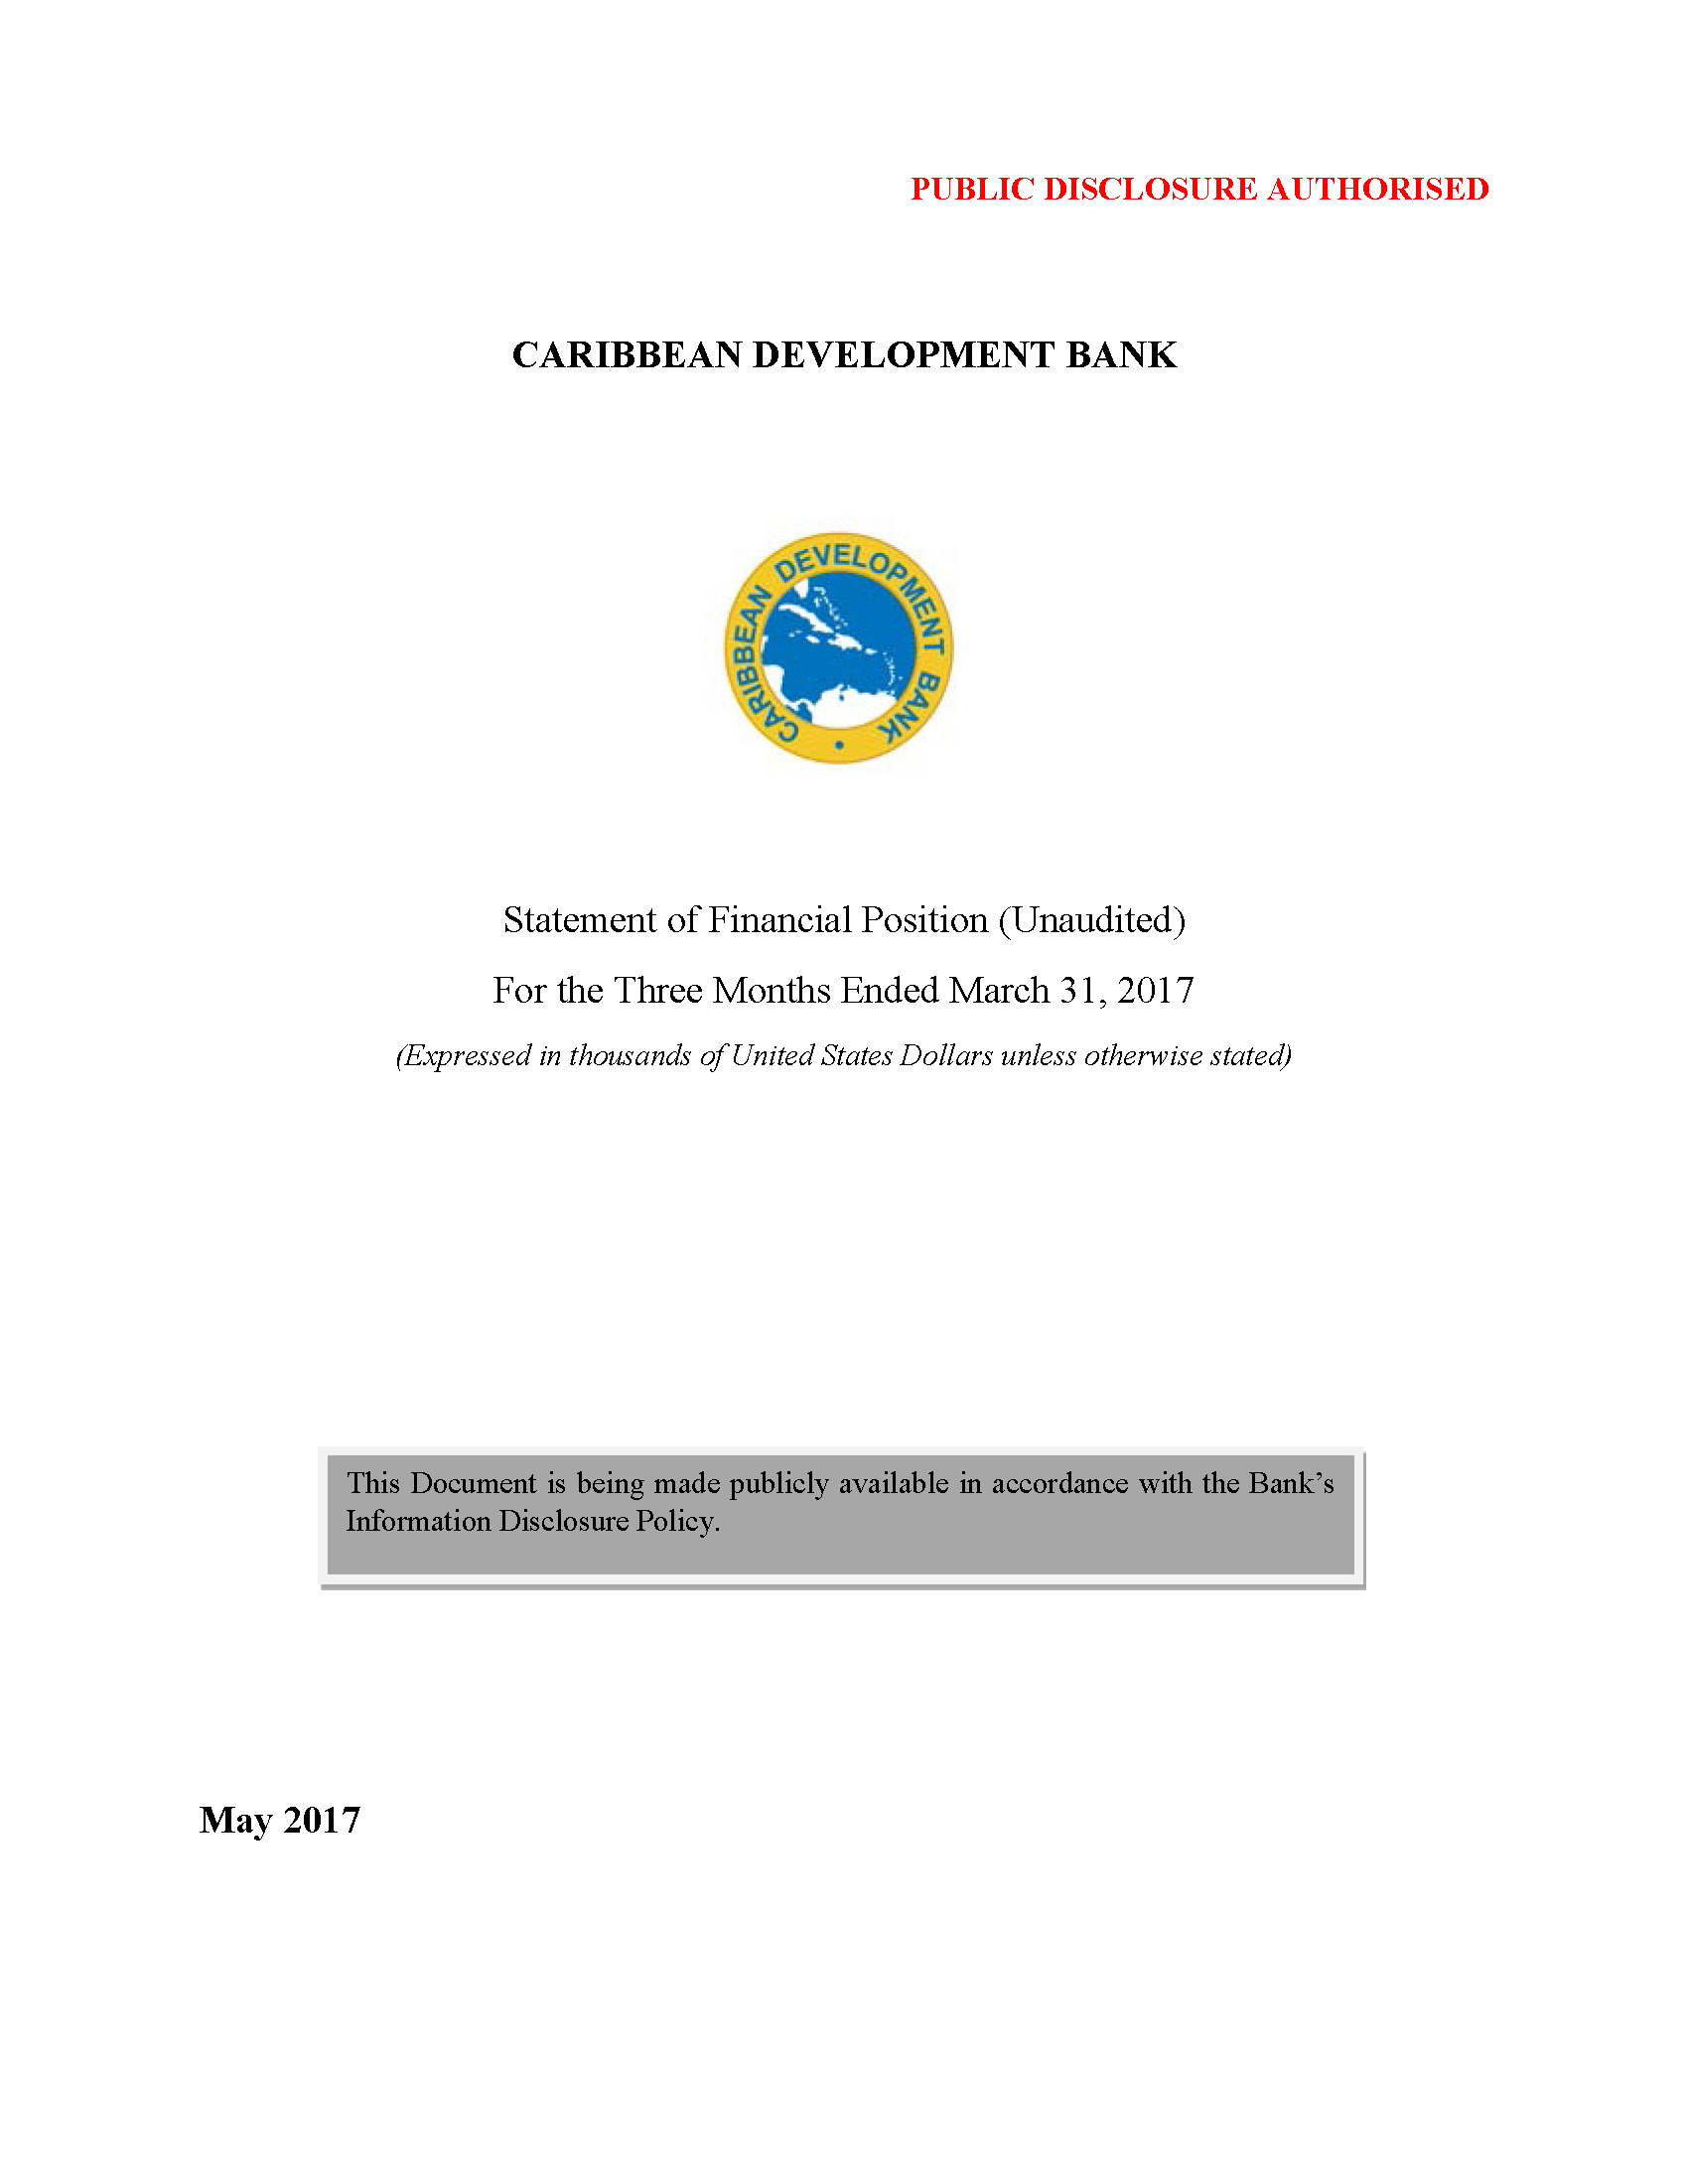 text-based cover featuring document title against white background